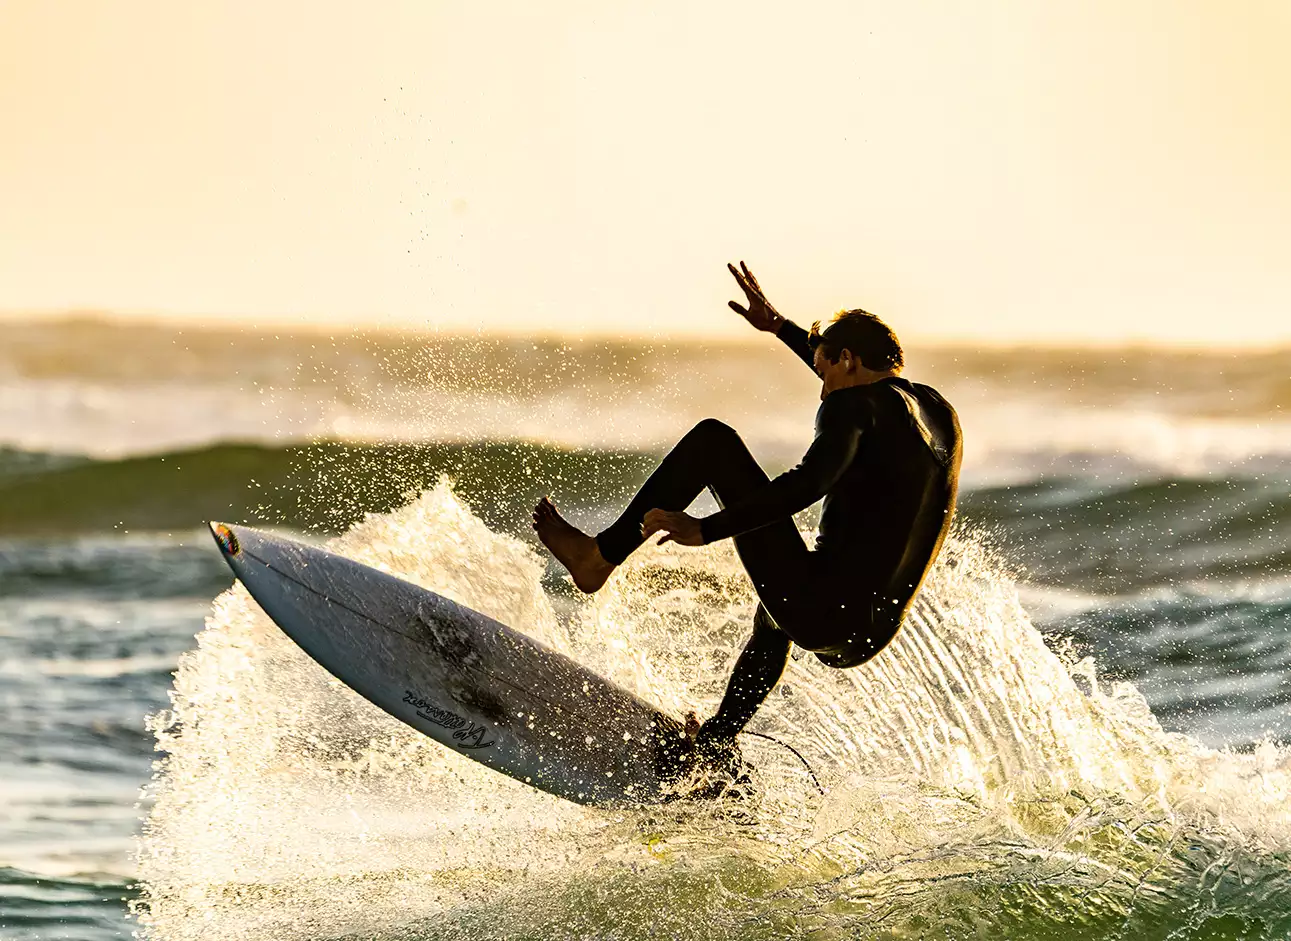 Surfing - Catch thrilling waves and ride the surf for an adrenaline-pumping experience